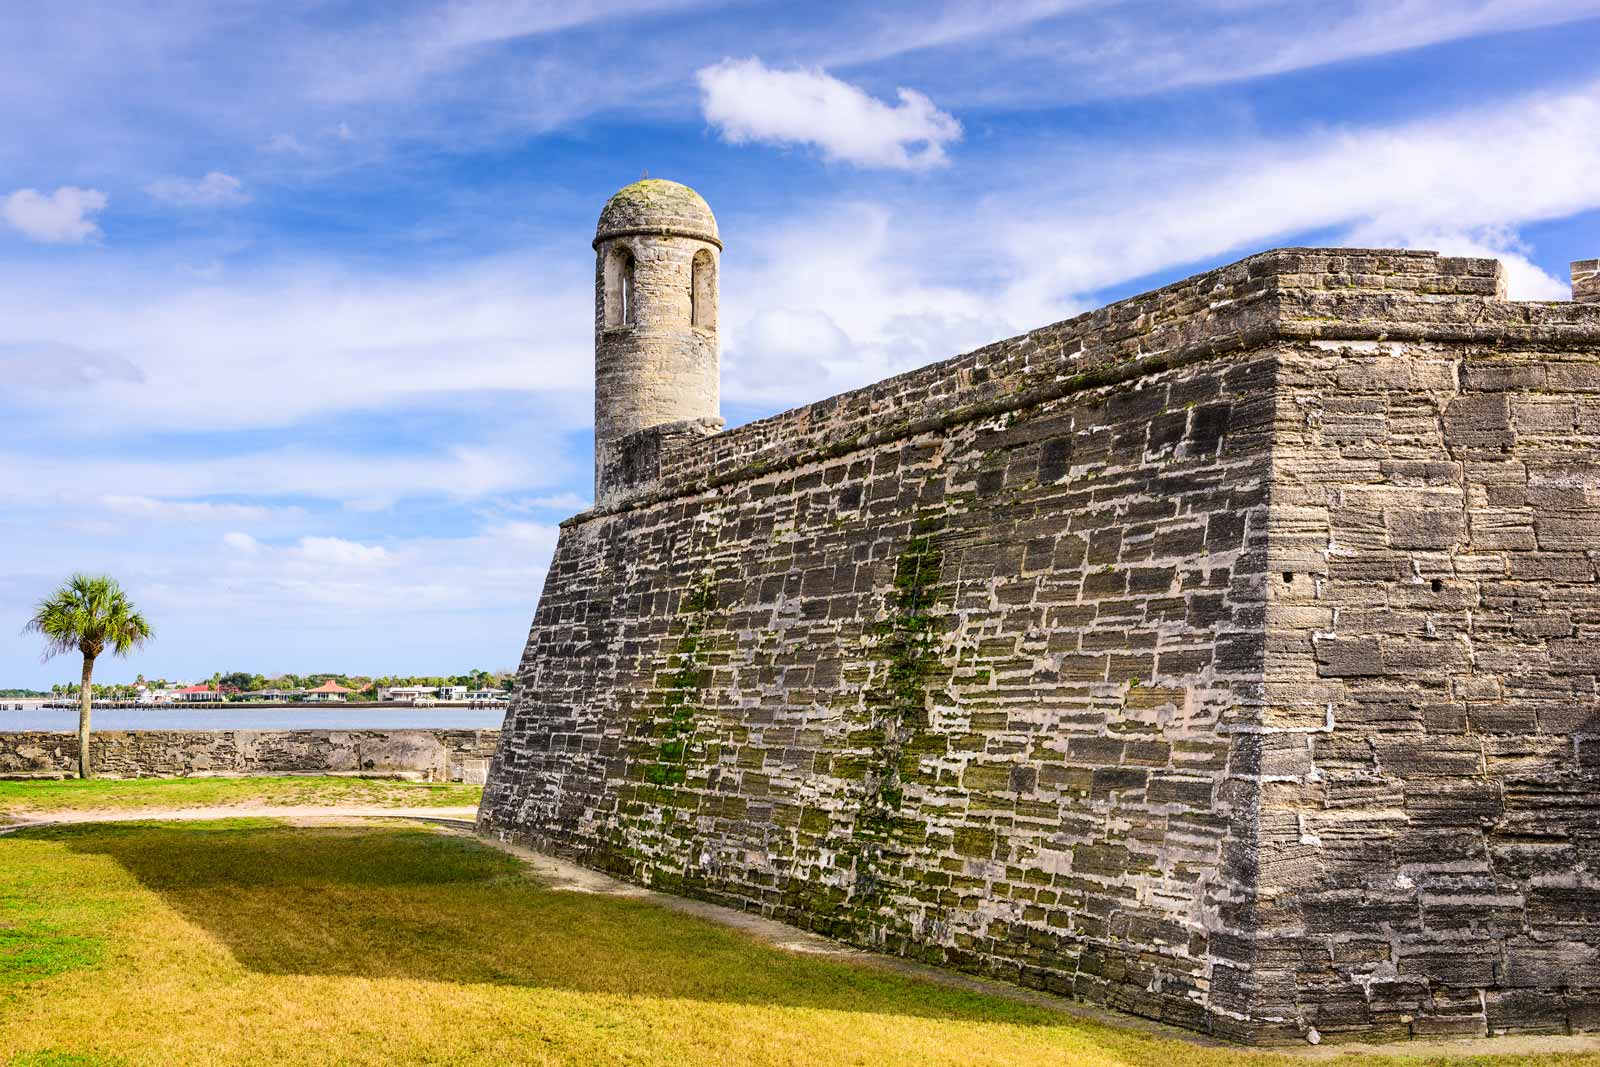  St. Augustine, Florida is the oldest city